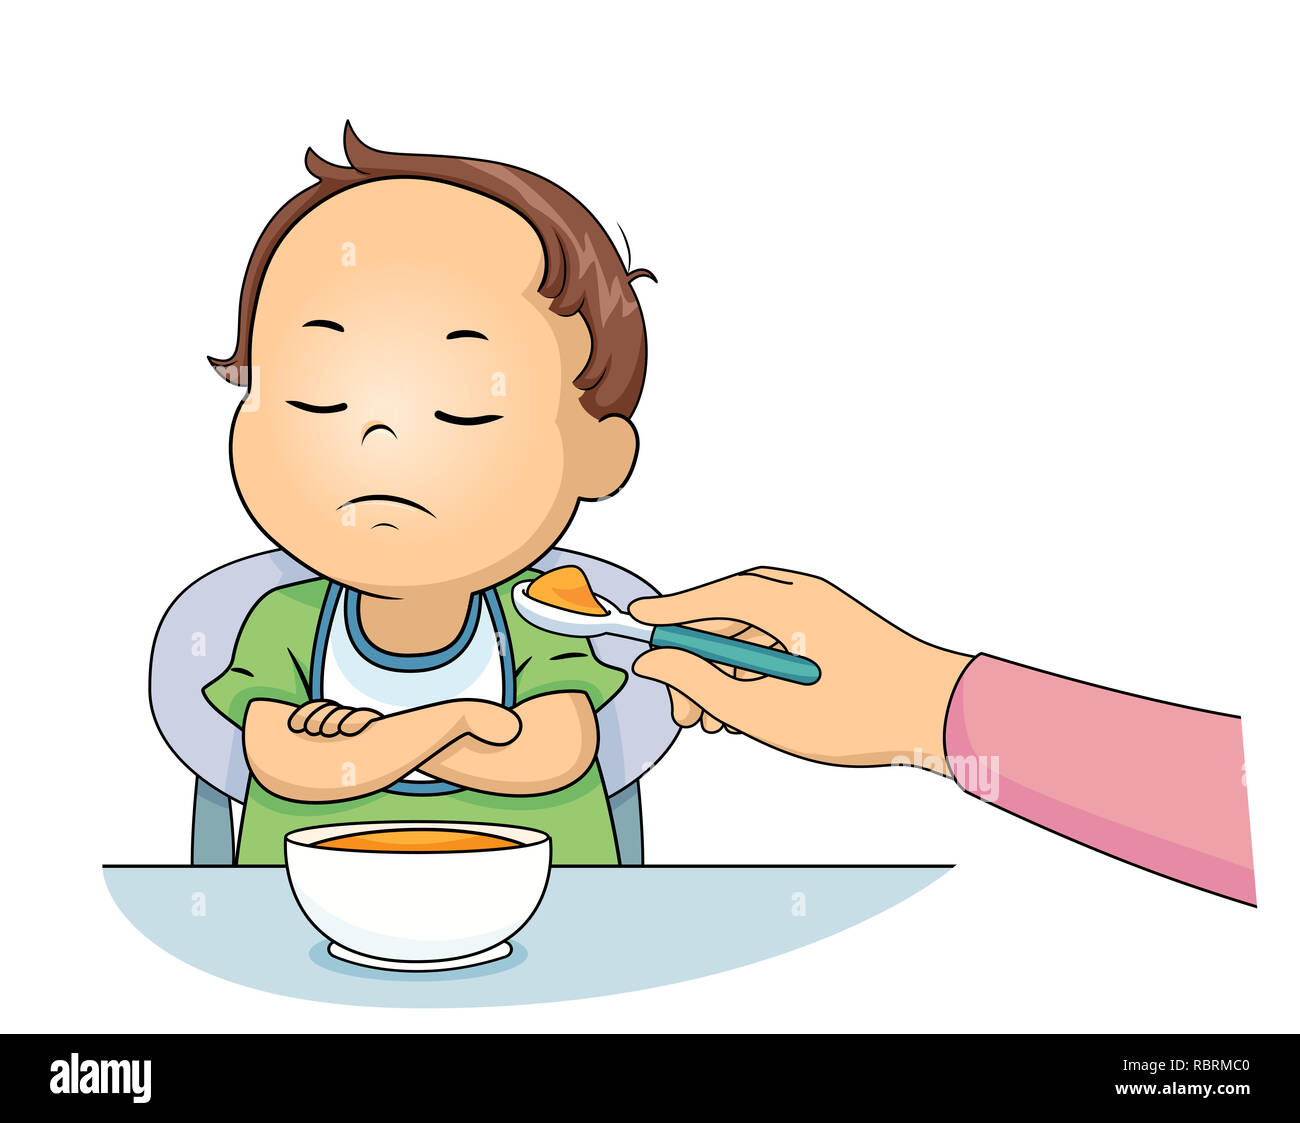 Illustration of a Kid Boy Toddler with Closed Arms and Refusing to Eat  Stock Photo - Alamy